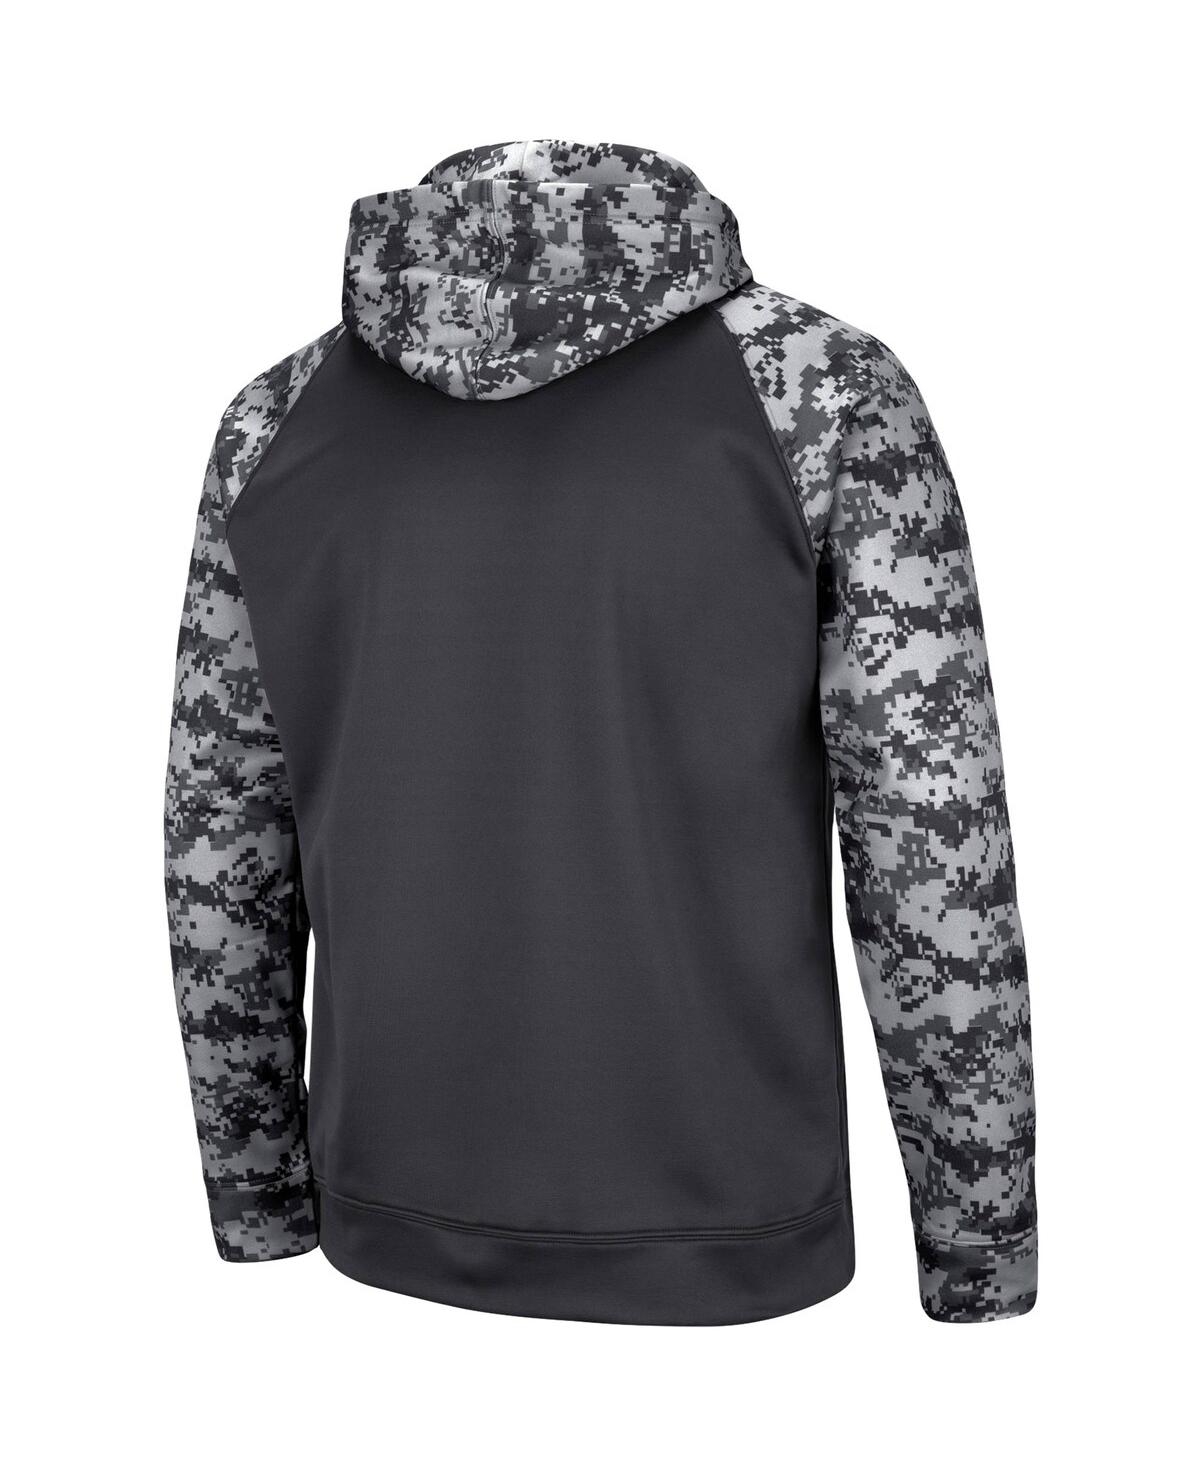 Shop Colosseum Men's Charcoal Oklahoma Sooners Oht Military-inspired Appreciation Digital Camo Pullover Hoodie